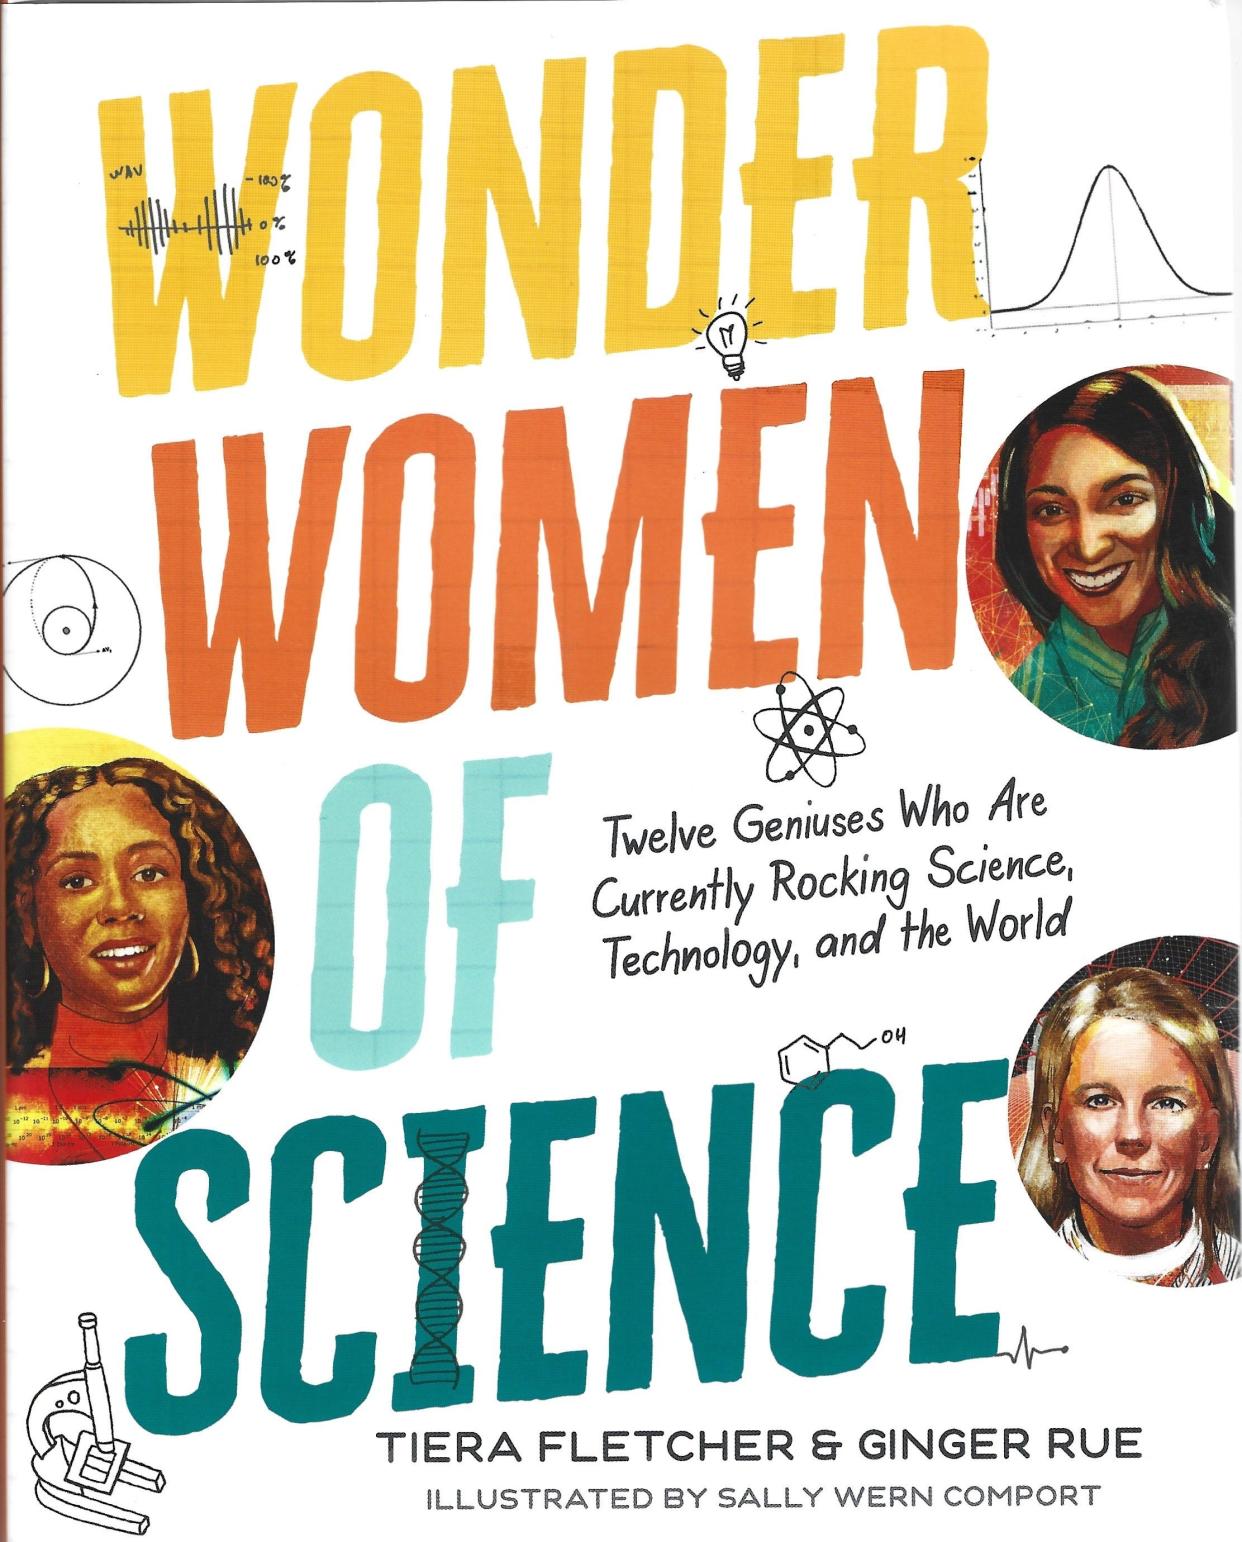 "Wonder Women of Science: Twelve Geniuses Who Are Currently Rocking Science, Technology and the World," by Tiera Fletcher and Ginger Rue; illustrated by Sally Wern Comport.